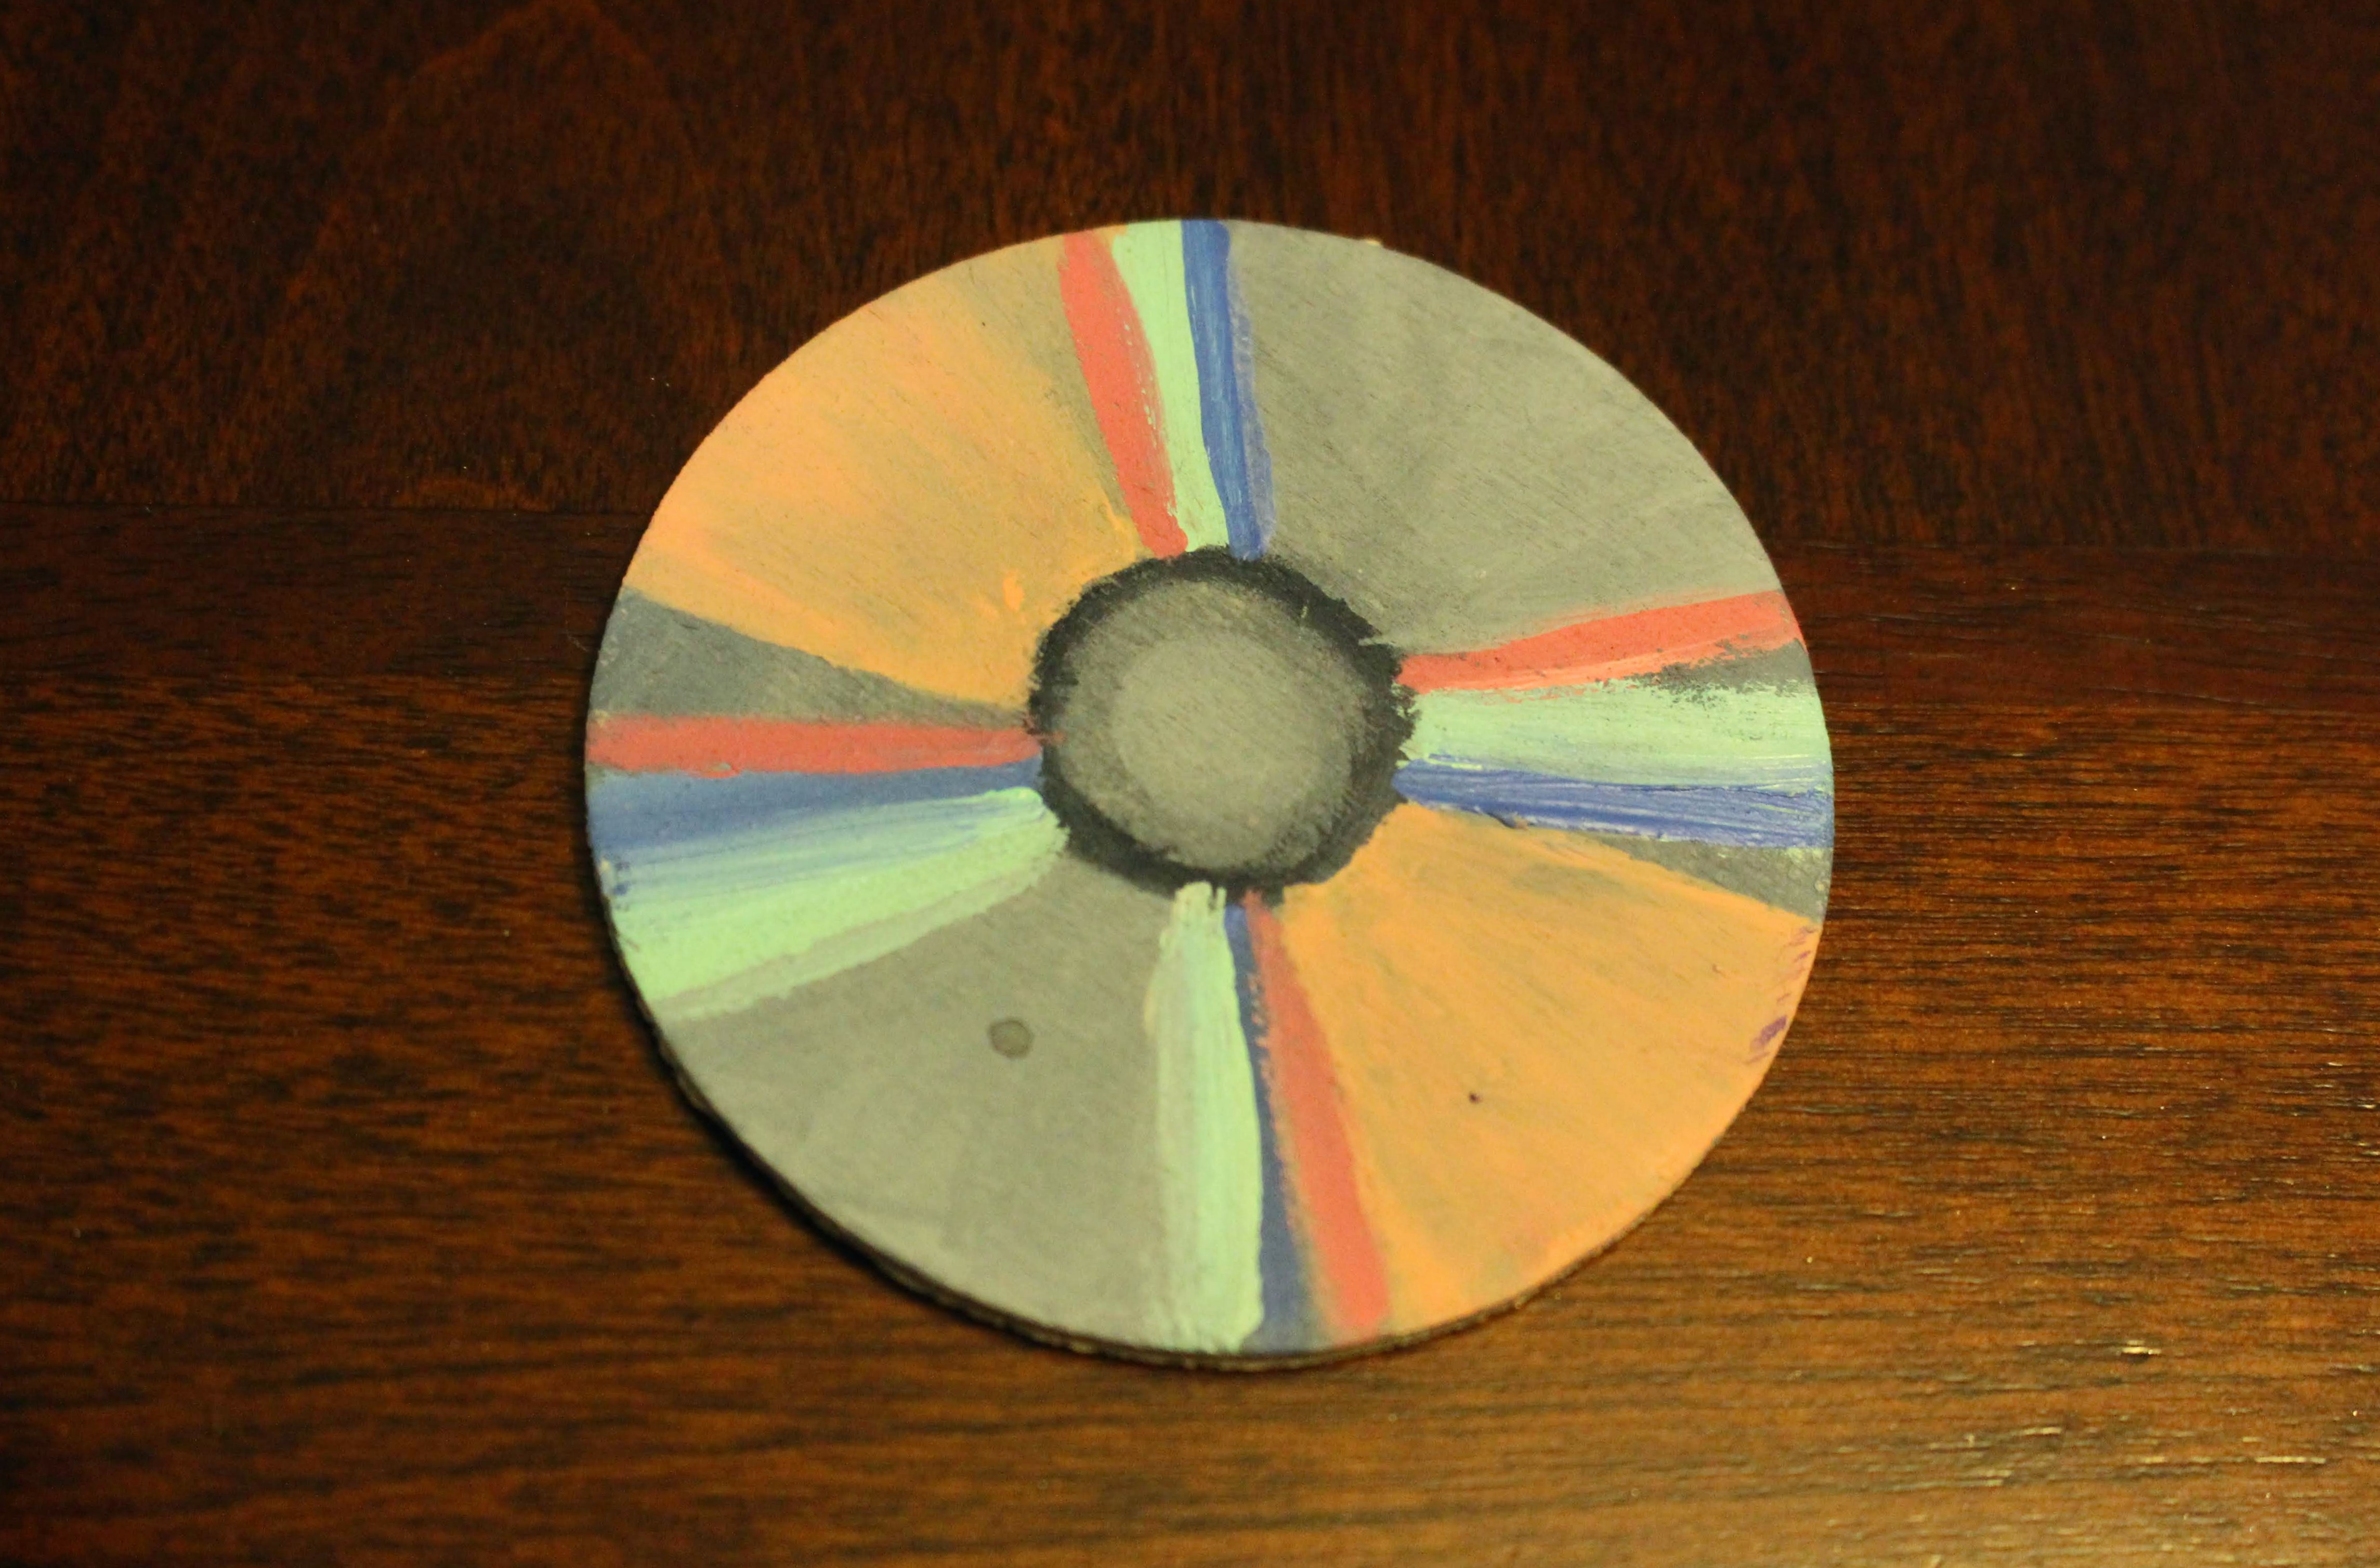 This is a painting of a CD. This was created from using acrylic on wood. This is a part of four other pieces in the kit which represent five types of devices that we used to consume hip-hop throughout the times. The CD in particular I associated with the 1990s.